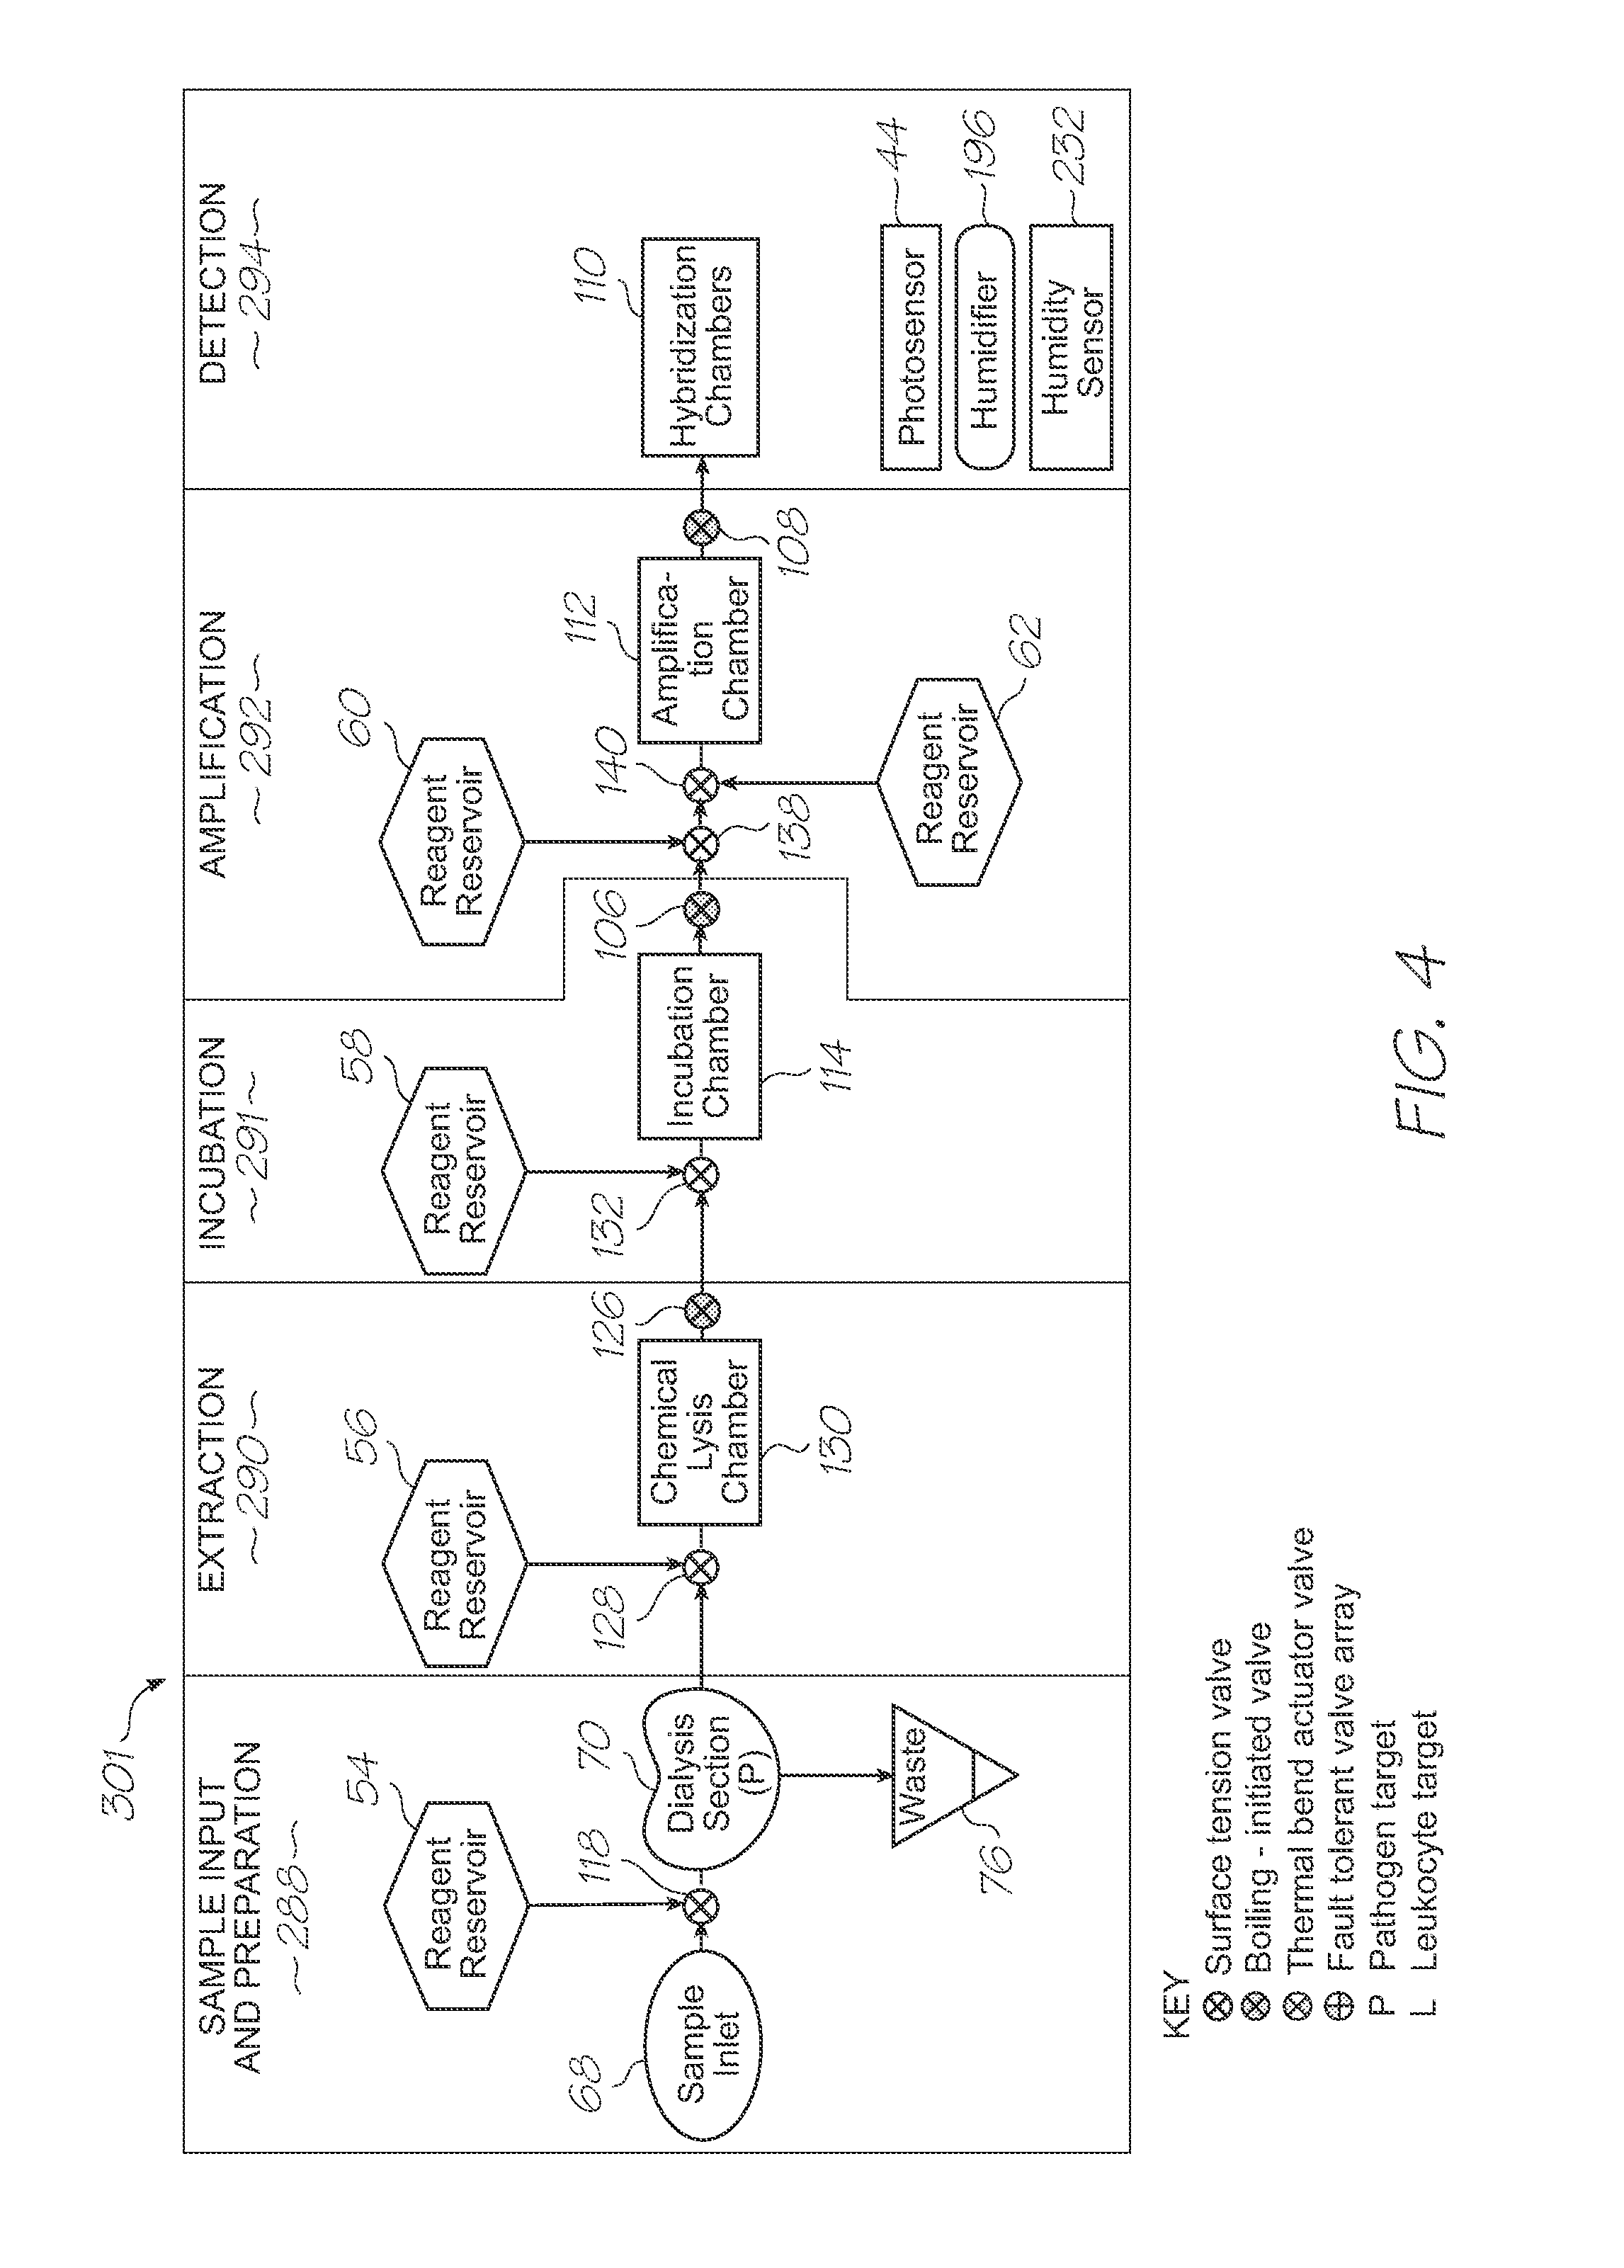 Microfluidic device with low reagent volumes